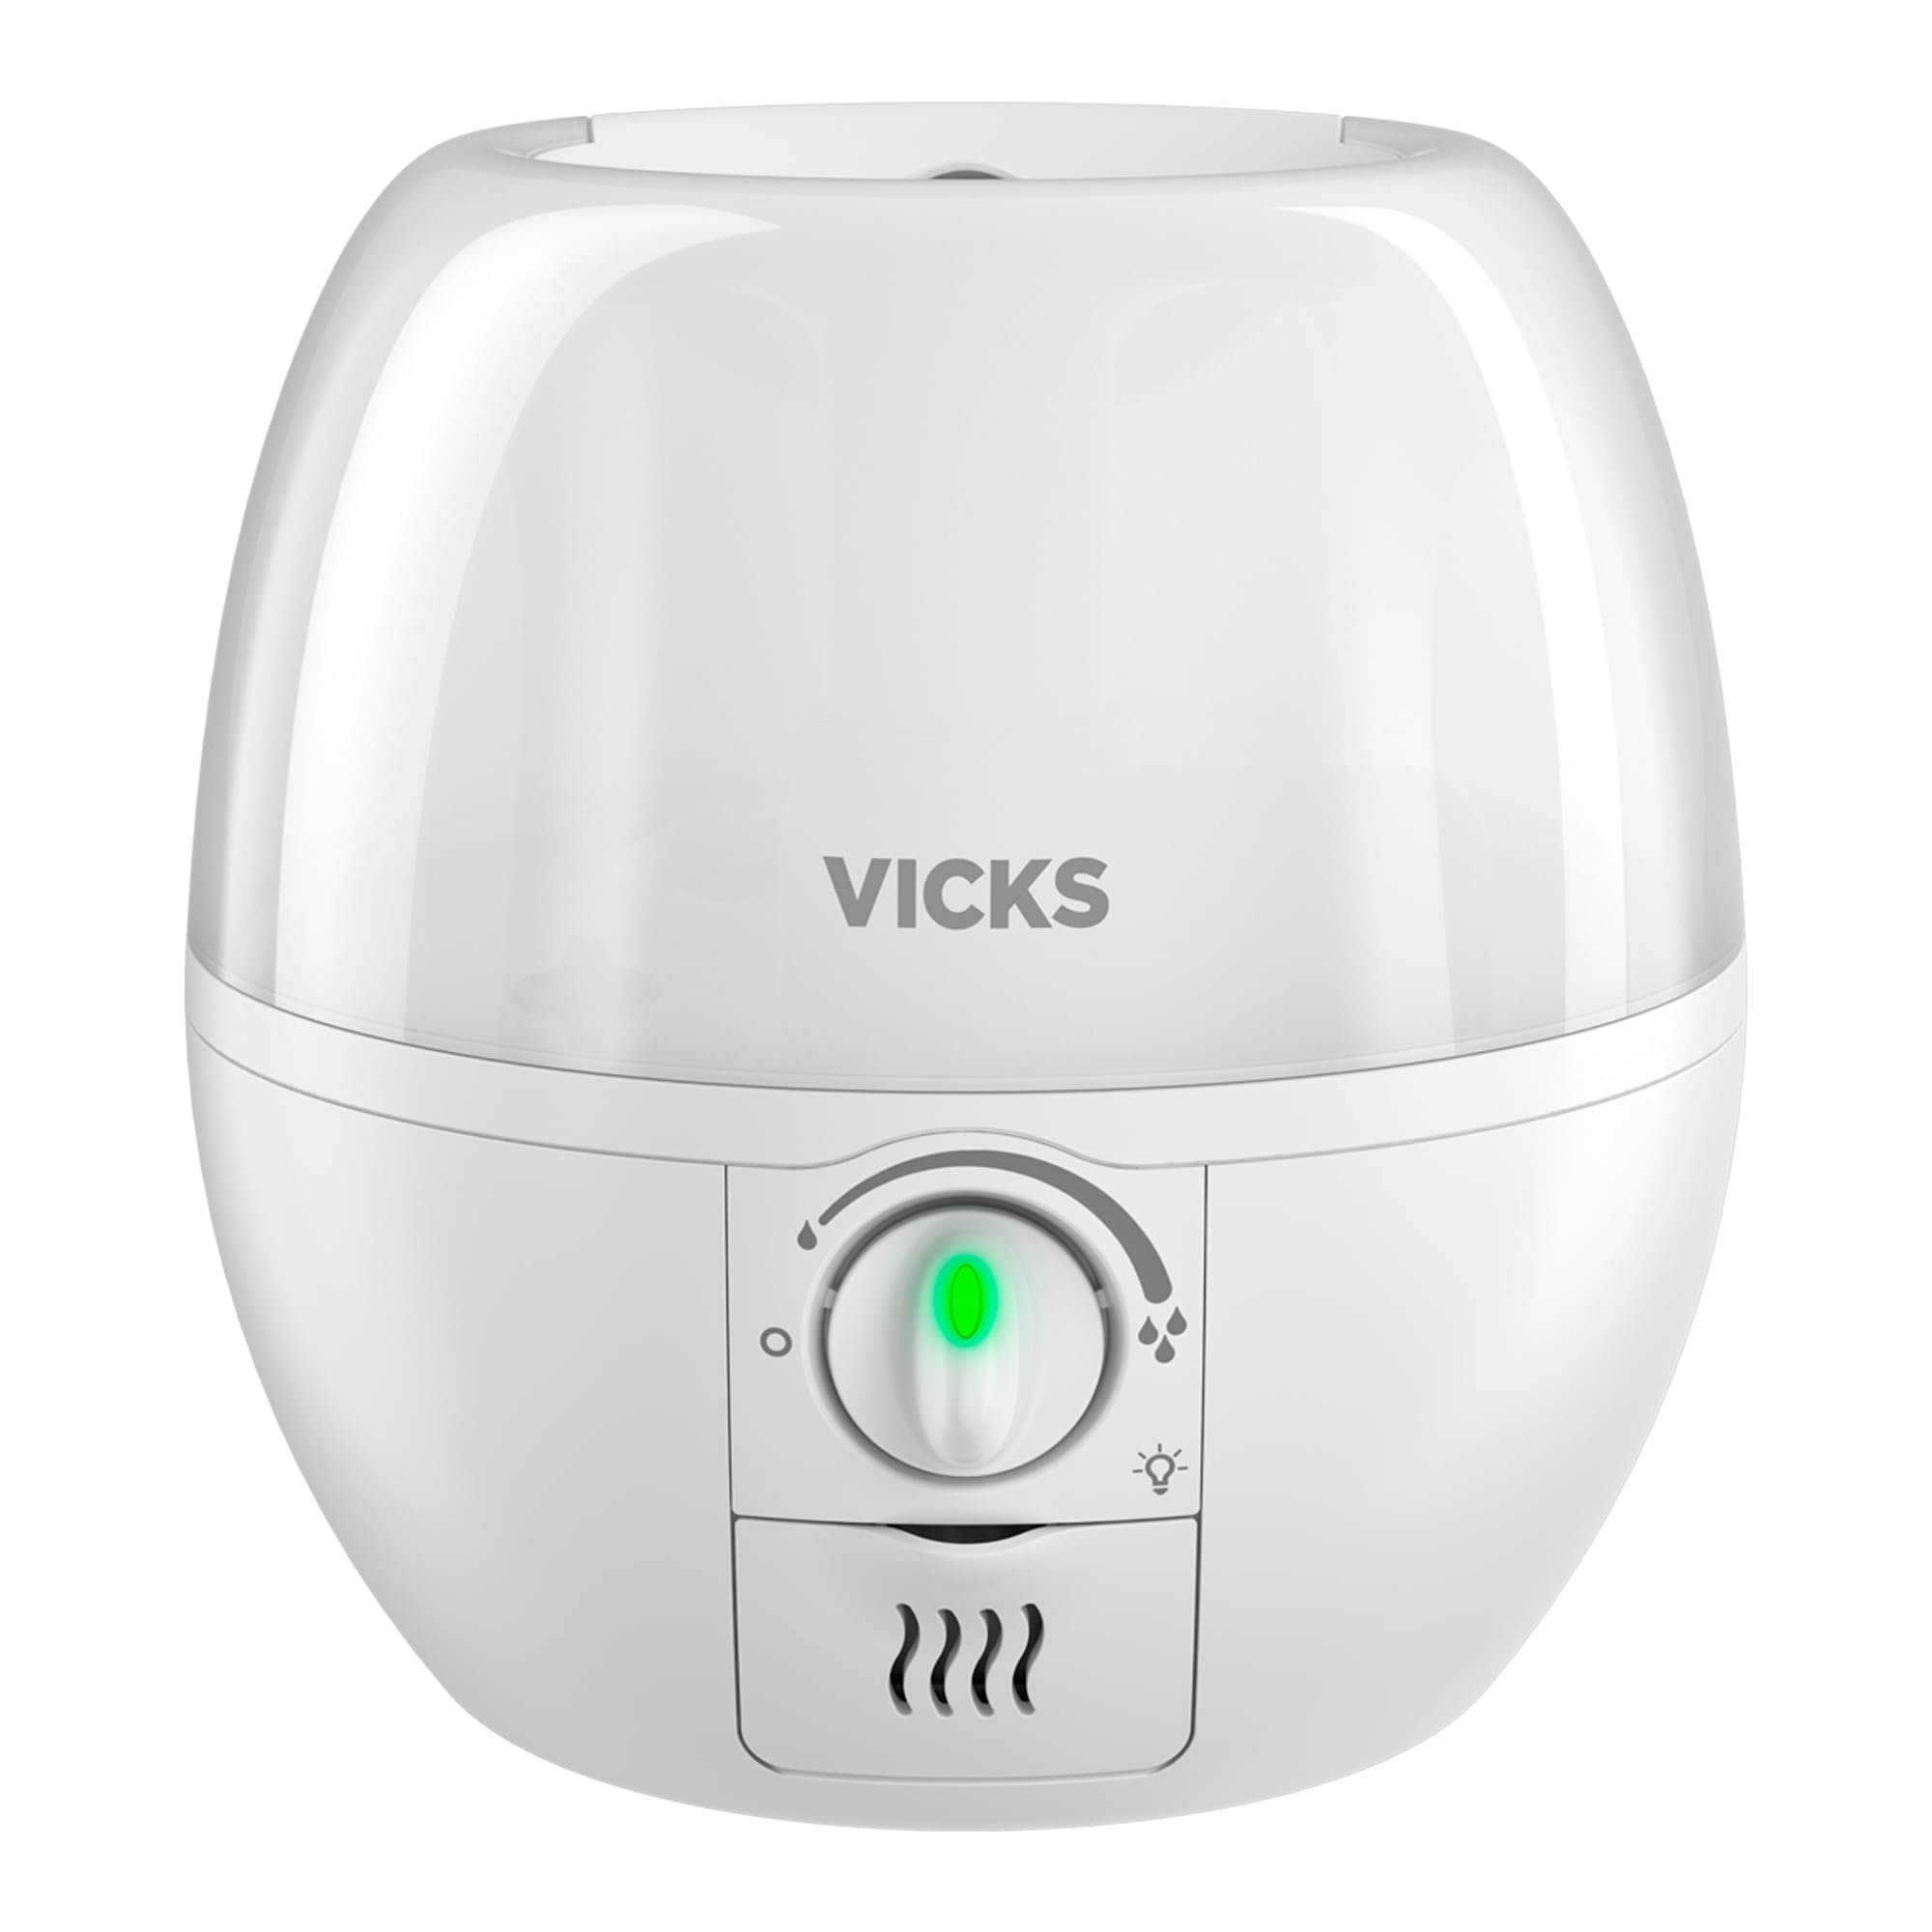 Vicks Filter-Free 3-in-1 SleepyTime Humidifier (White) $19.99 + Free S&H w/ Prime or $35+